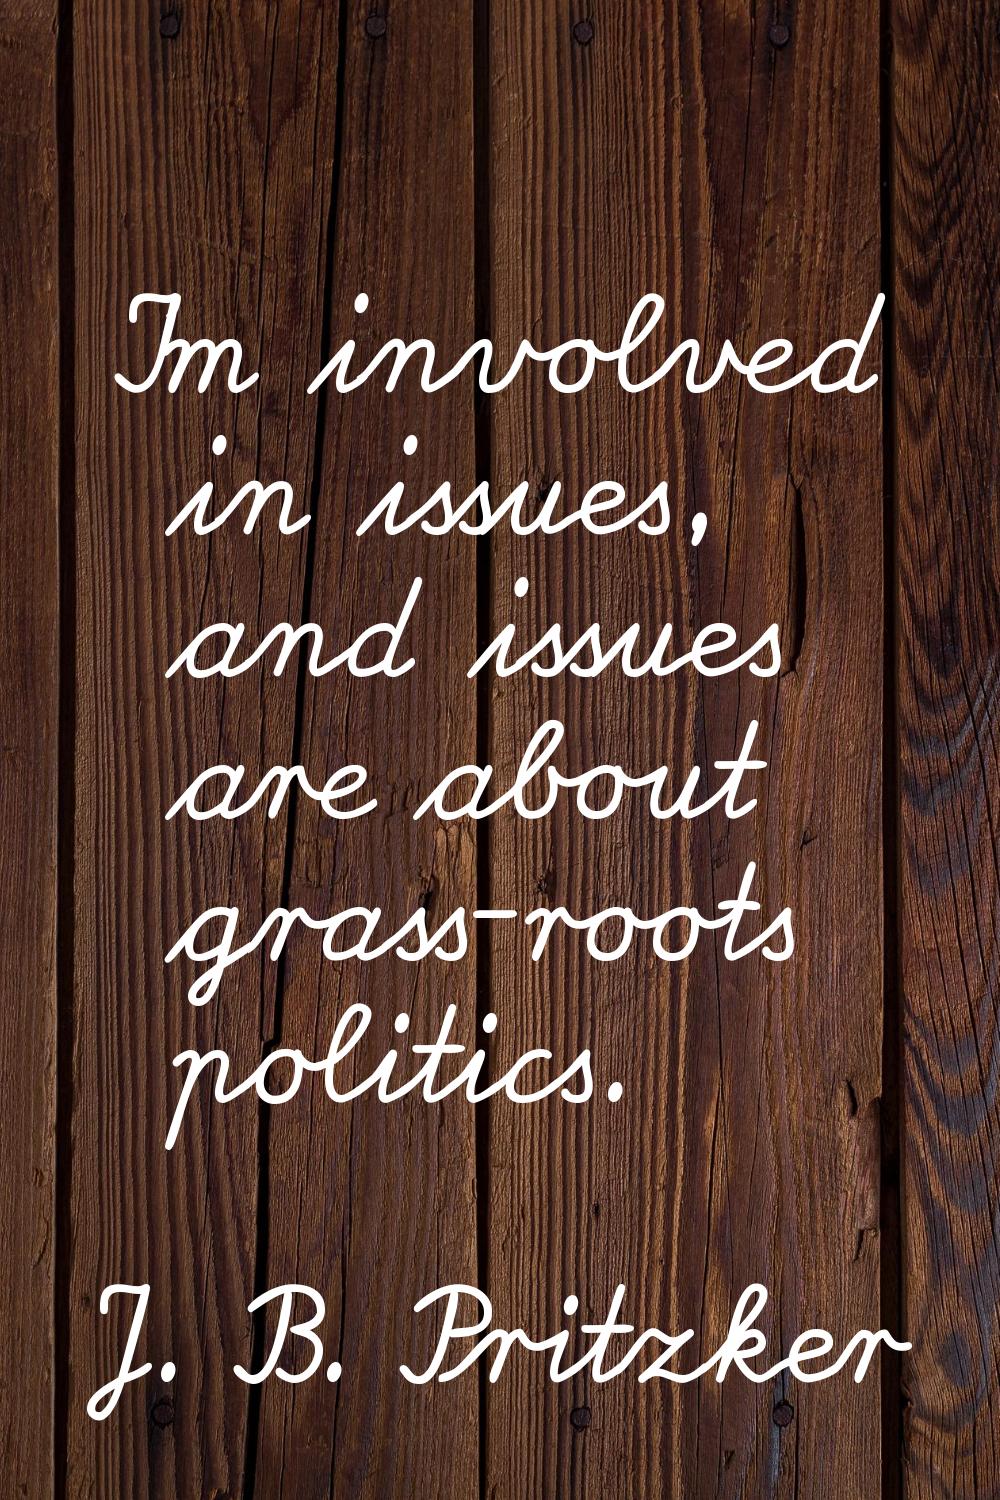 I'm involved in issues, and issues are about grass-roots politics.